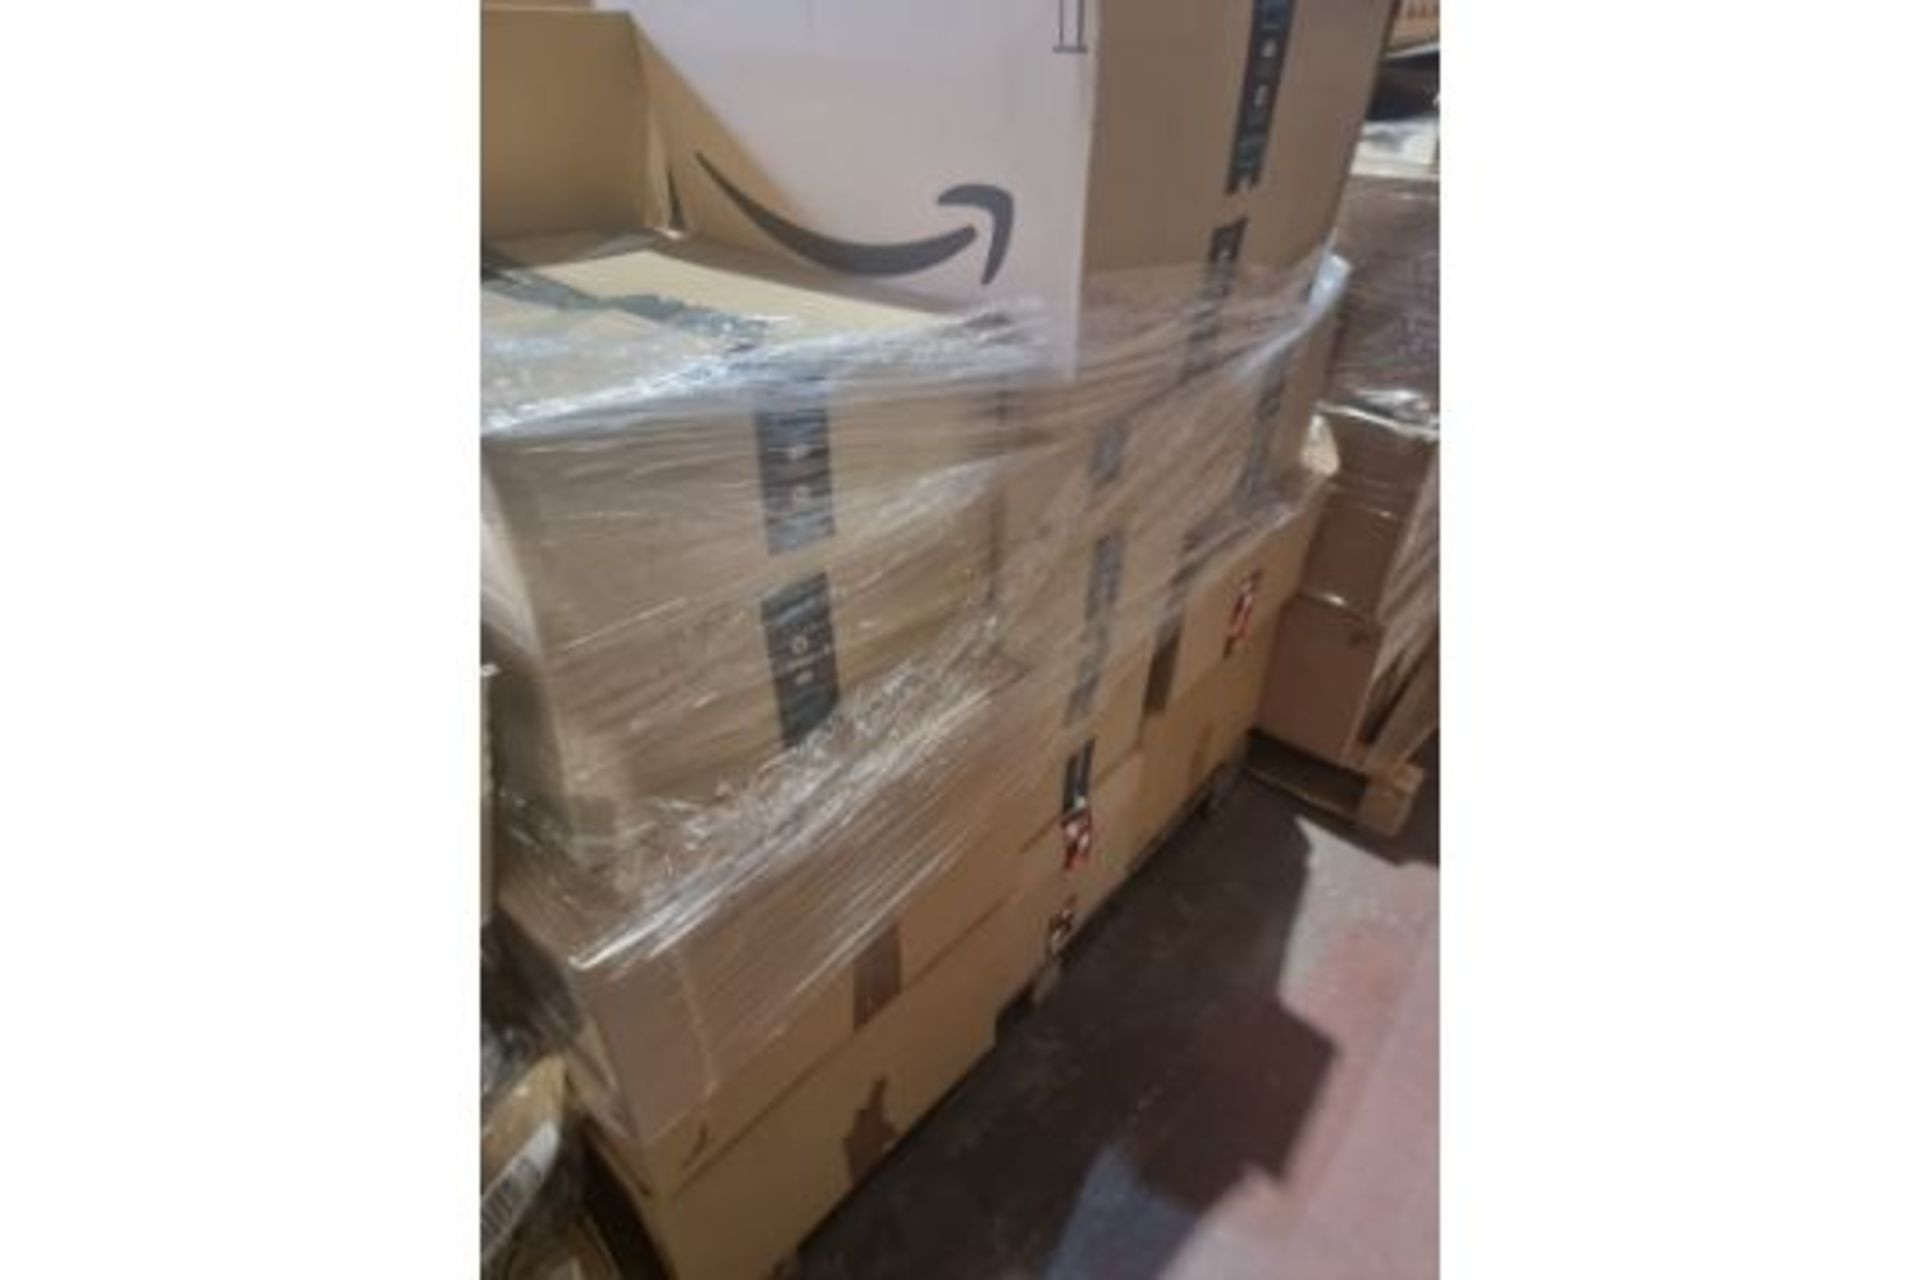 TRADE LOT TO CONTAIN 100 x MIXED BRAND NEW AMAZON OVERSTOCK ITEMS. ITEMS ARE PICKED RANDOMLY FROM - Image 24 of 29